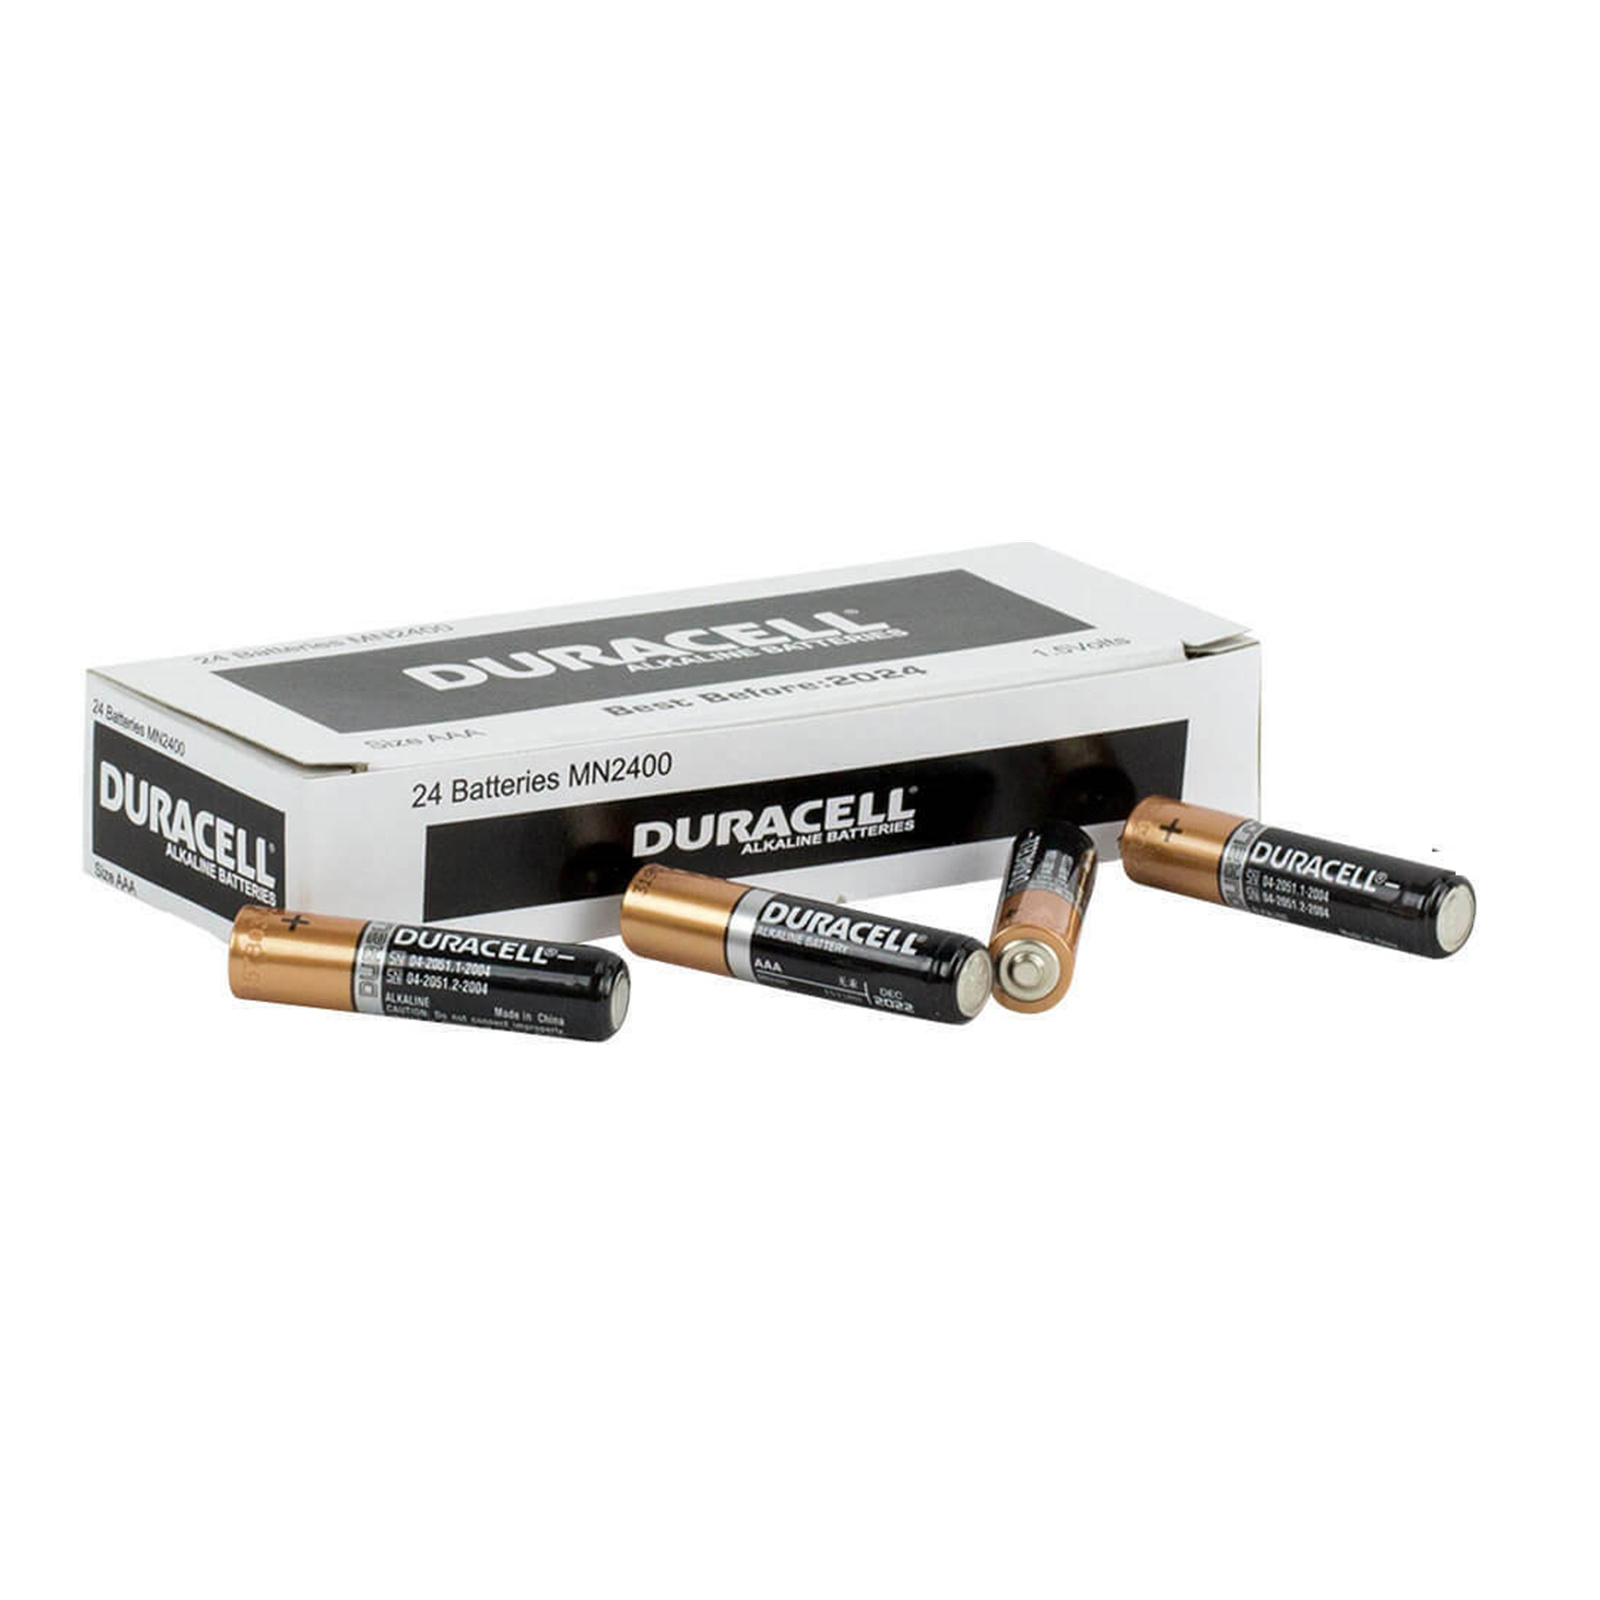 Duracell Coppertop 1.5V AA battery box of 24